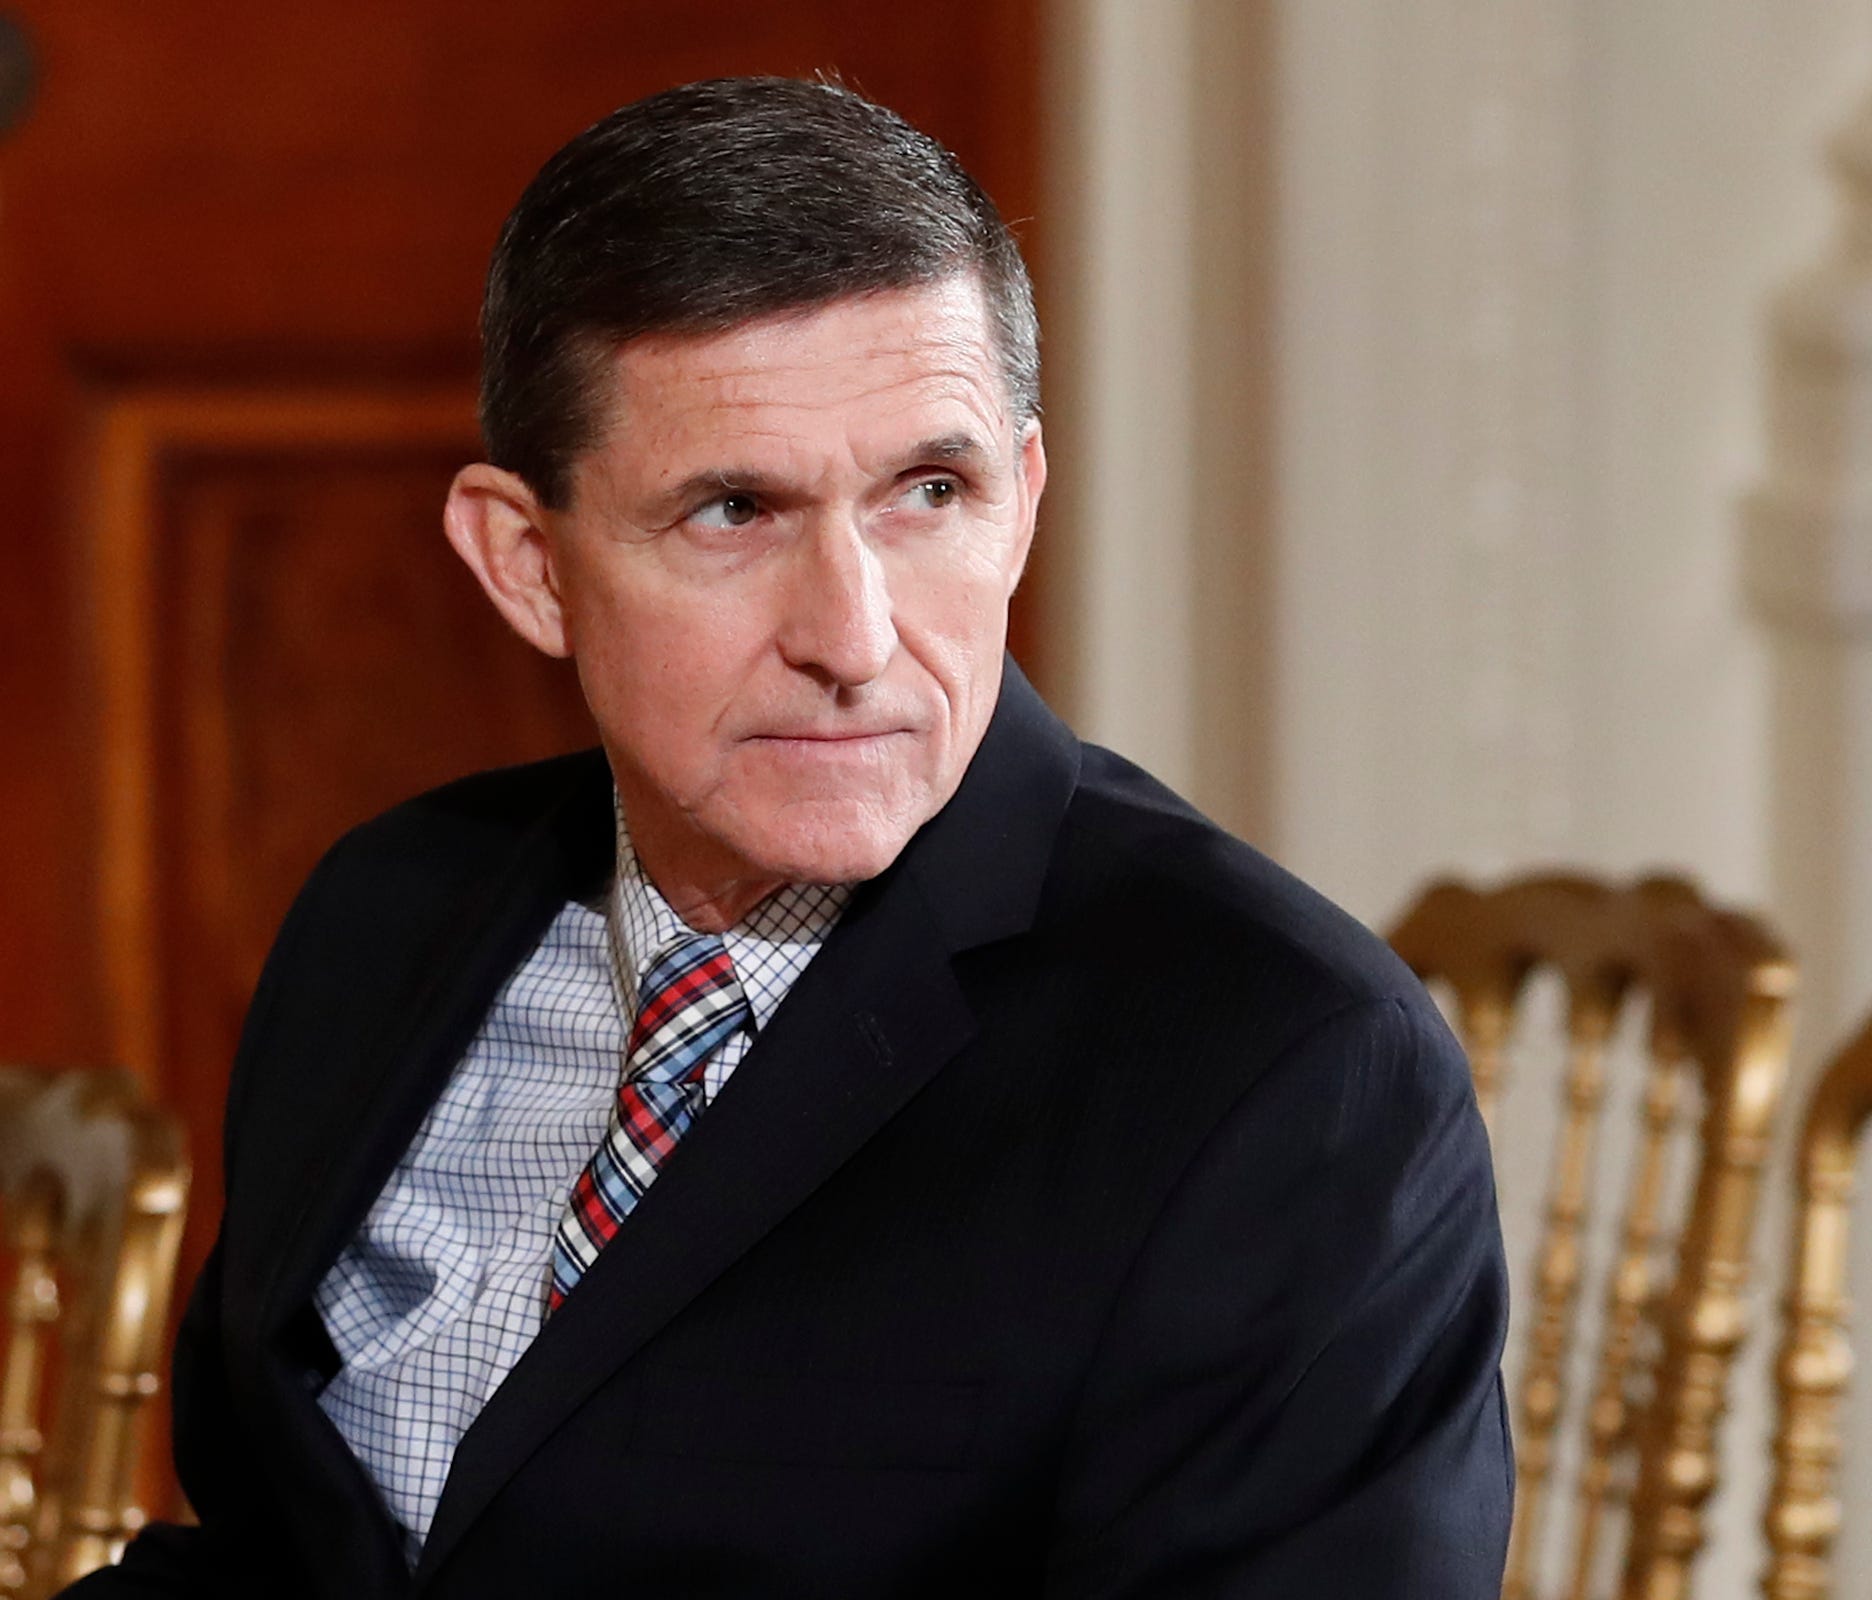 In this Feb. 10, 2017 file photo, then-National Security Adviser Michael Flynn sits in the East Room of the White House in Washington. Former CIA Director James Woolsey has accused former Trump administration National Security Adviser Michael Flynn o